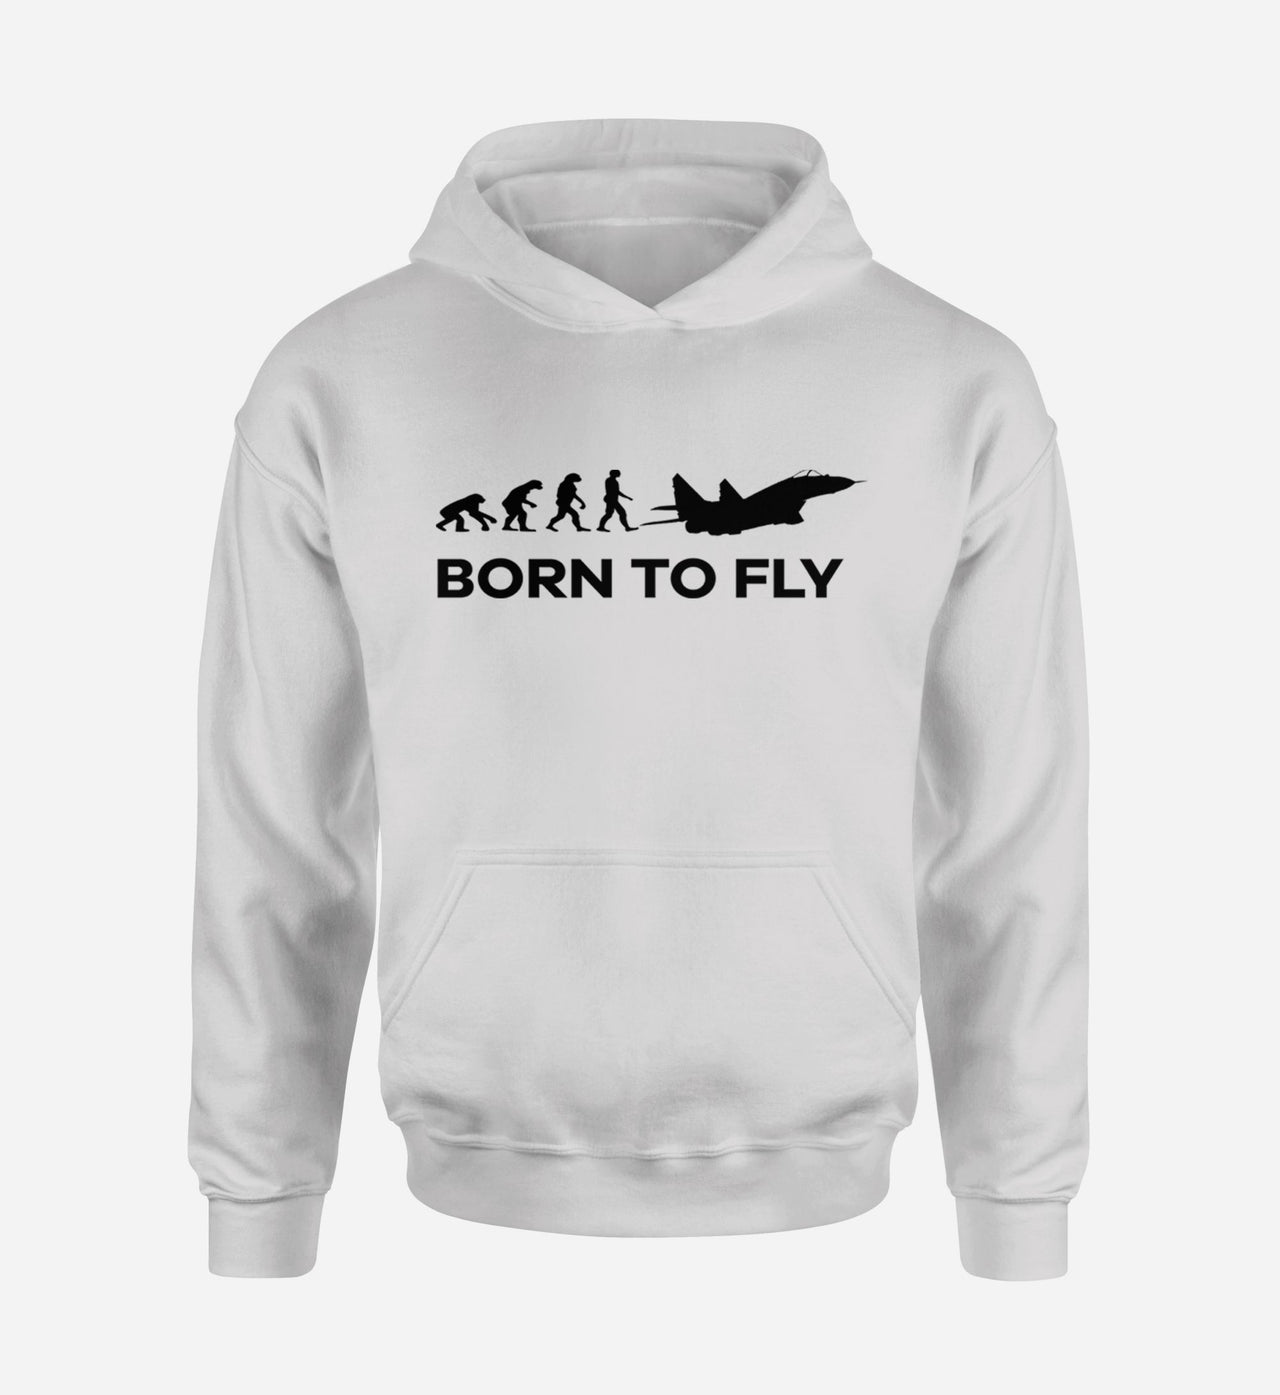 Born To Fly Military Designed Hoodies